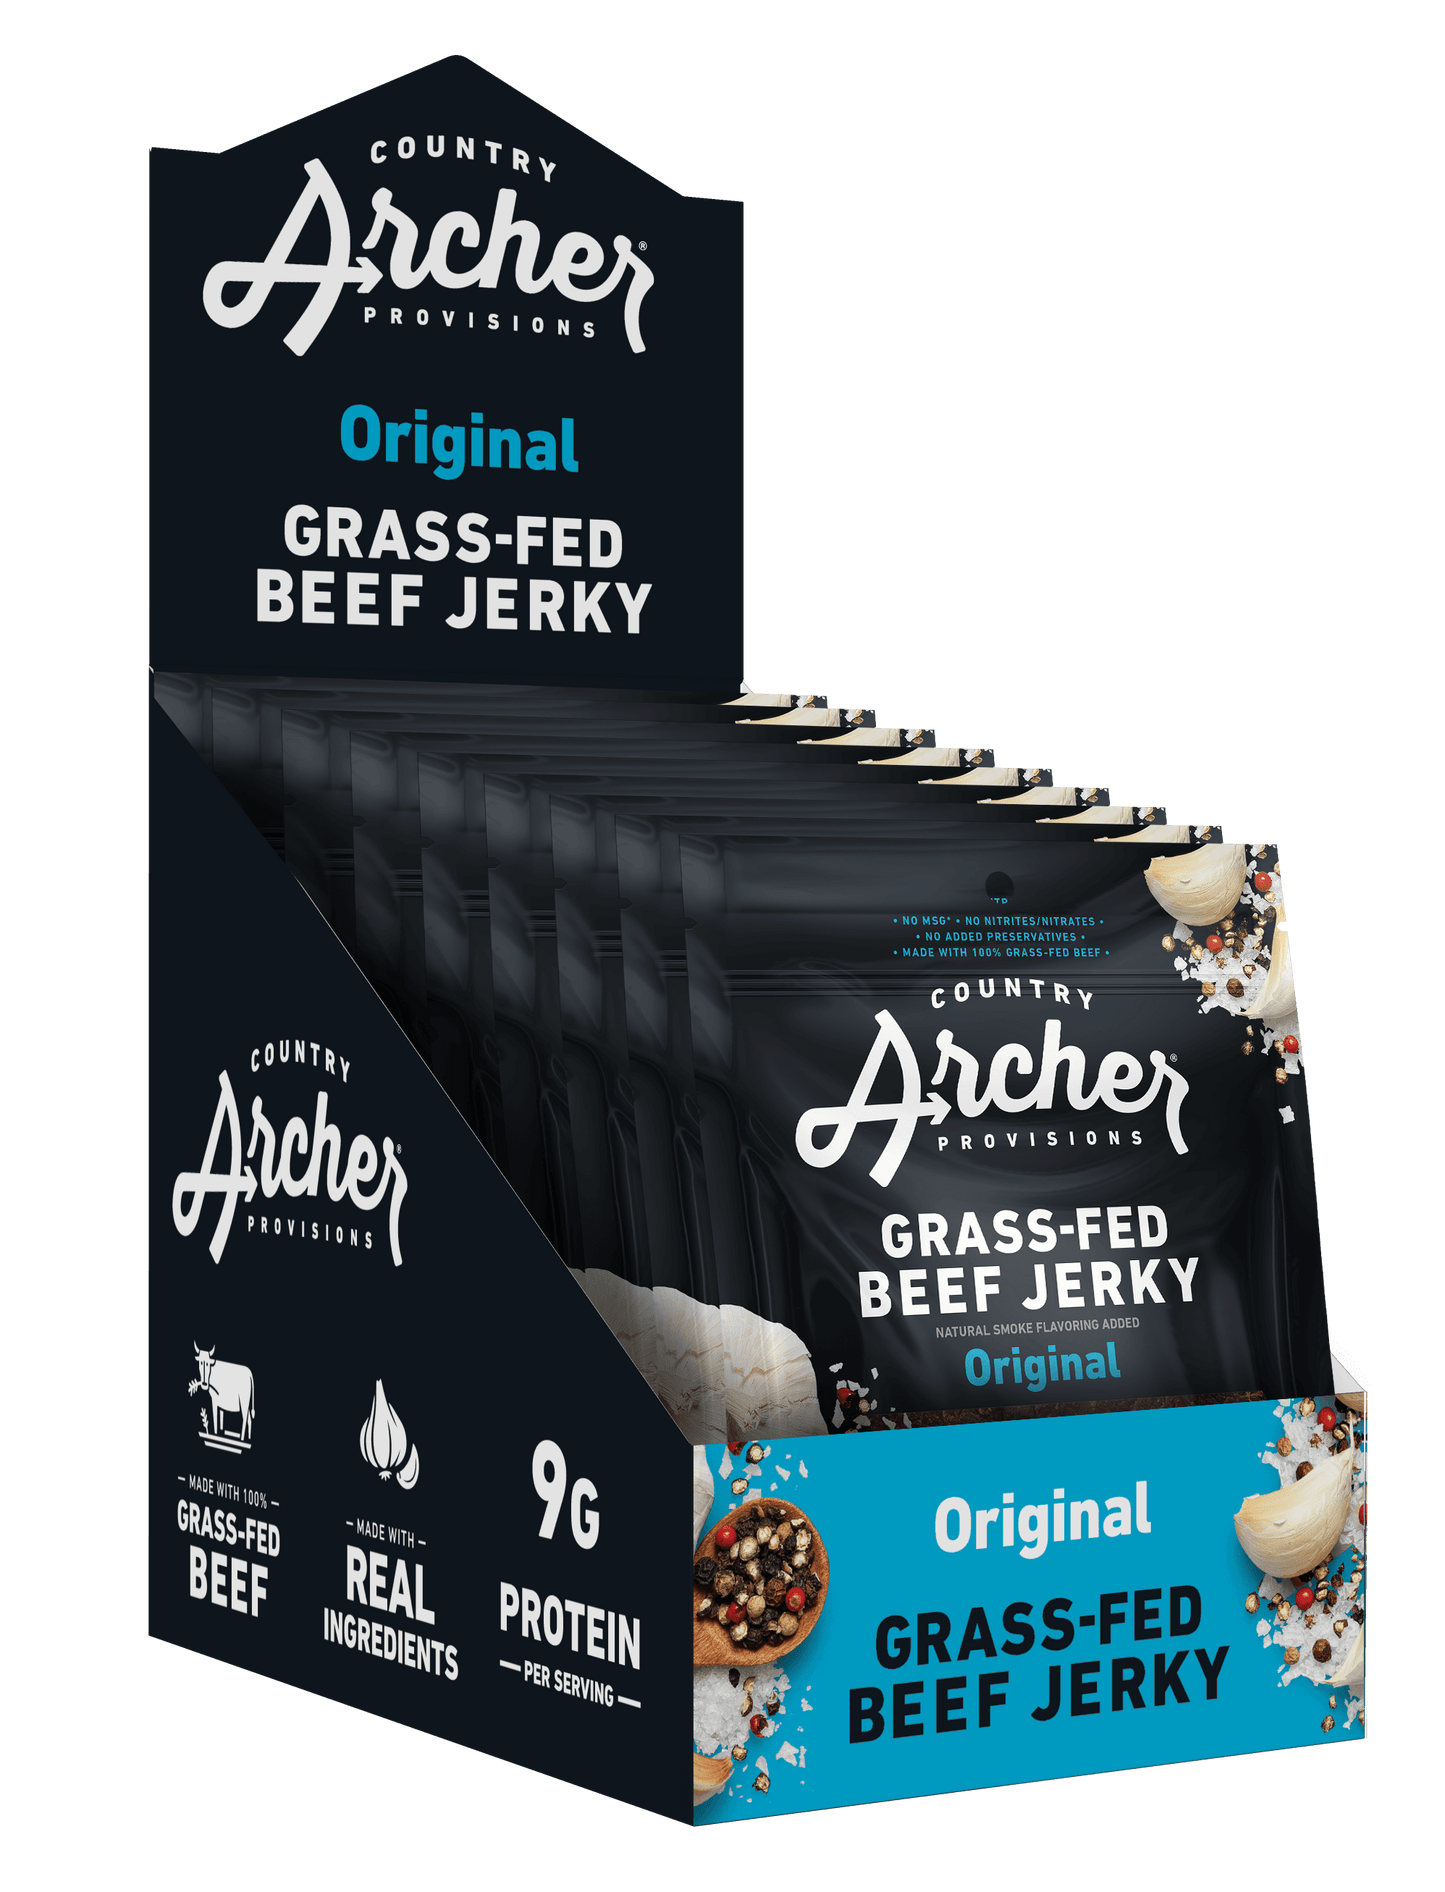 Country Archer Grass-Fed Beef Jerky Original 1 oz package, multi-package caddy